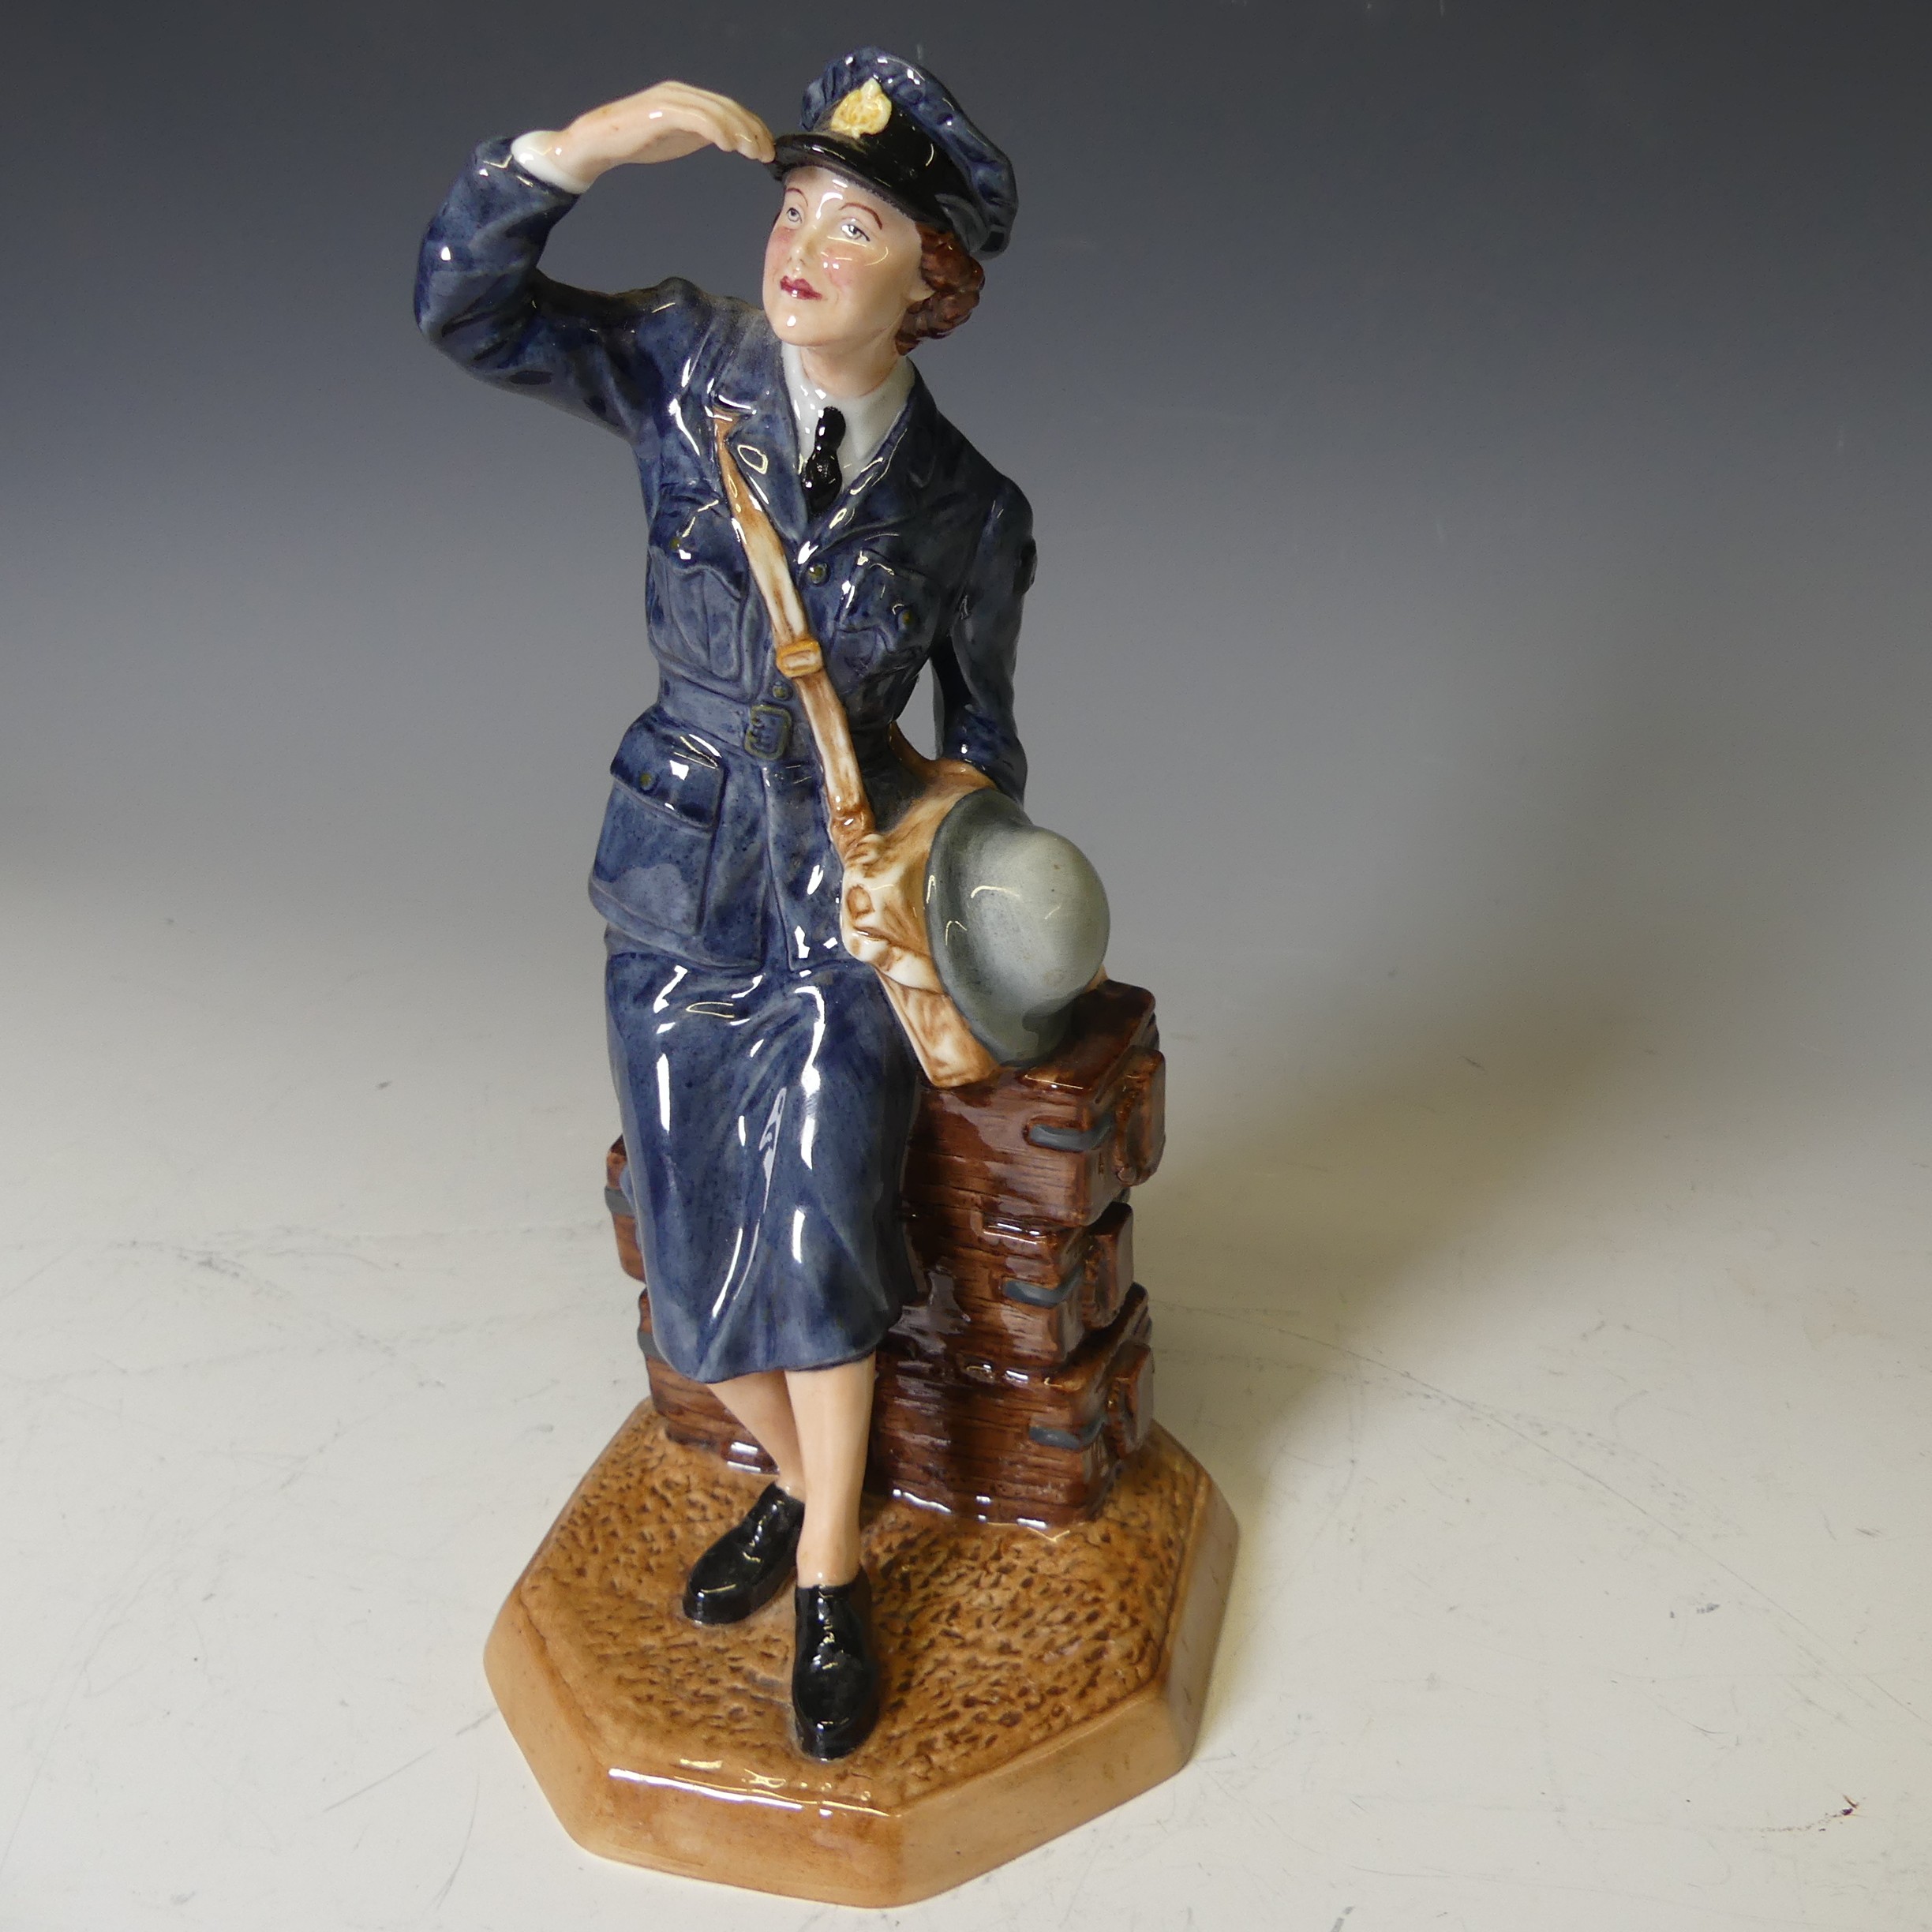 A Royal Doulton Womens Auxiliary Air Force Figure, HN4554 limited edition (174/2500), H 22cm. - Image 2 of 5